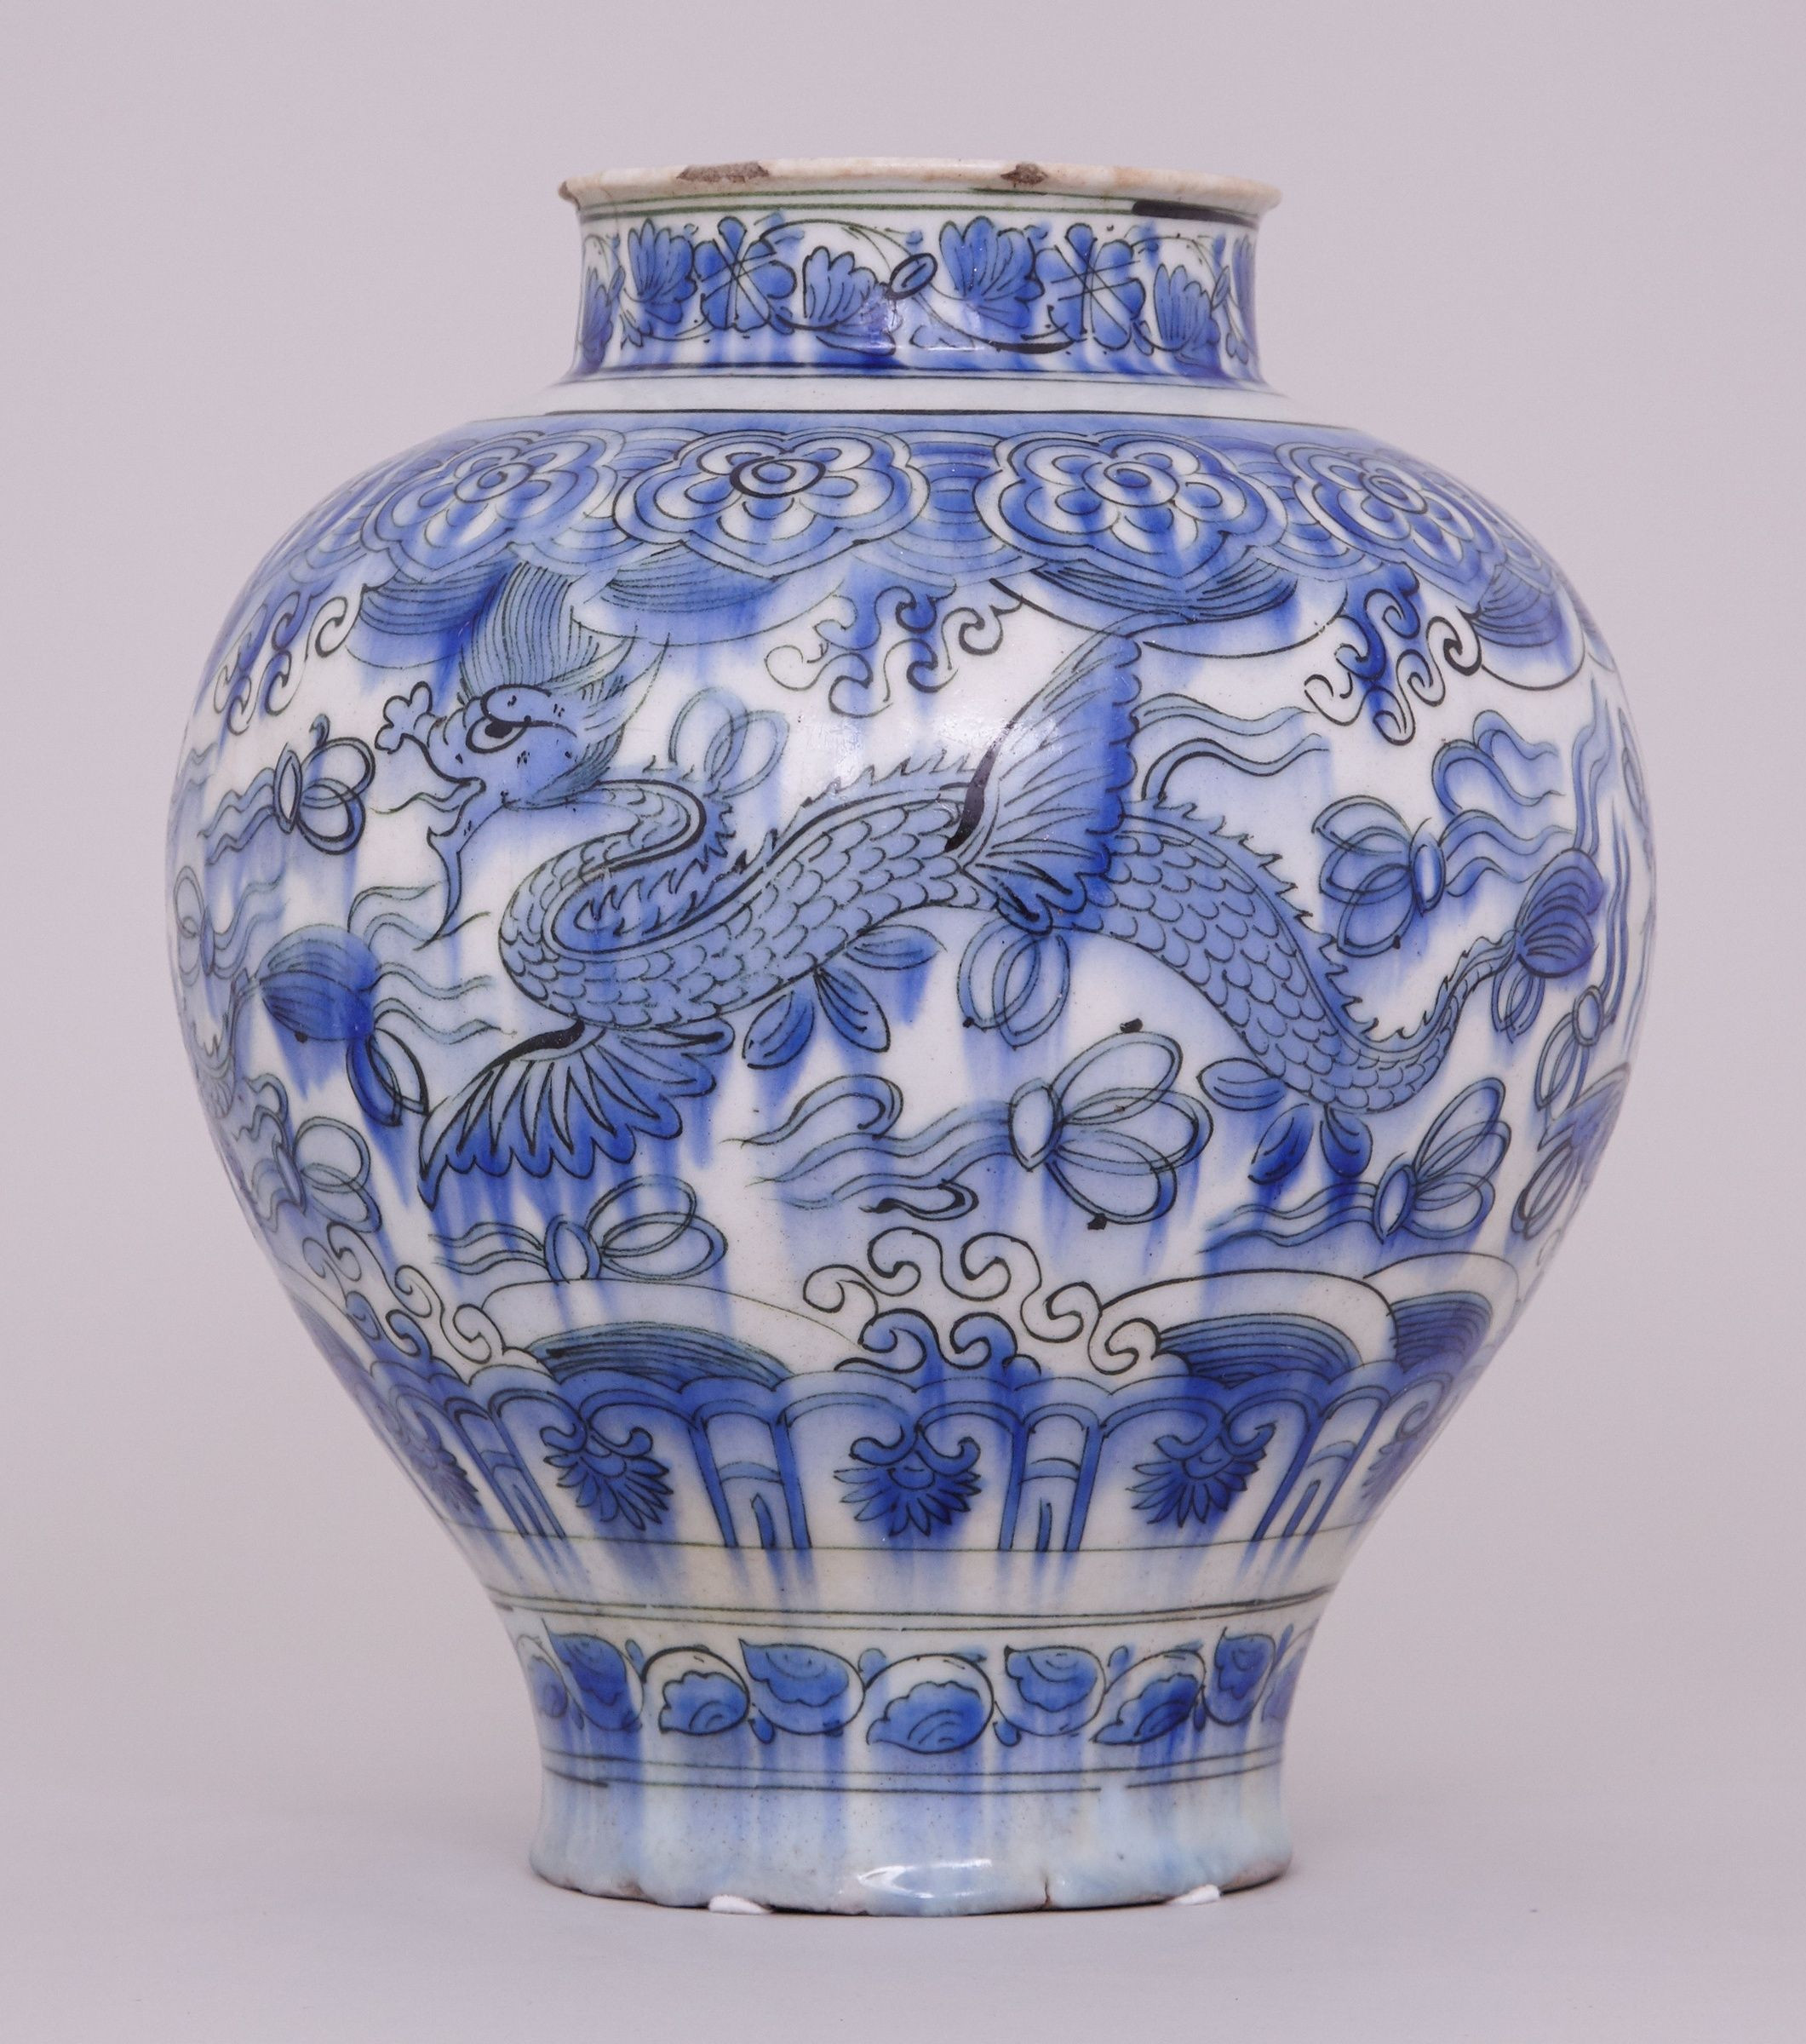 24 attractive Satsuma Vase with Handles 2023 free download satsuma vase with handles of white pottery vase elegant a blue and white persian safavid jar 17th intended for white pottery vase elegant a blue and white persian safavid jar 17th century